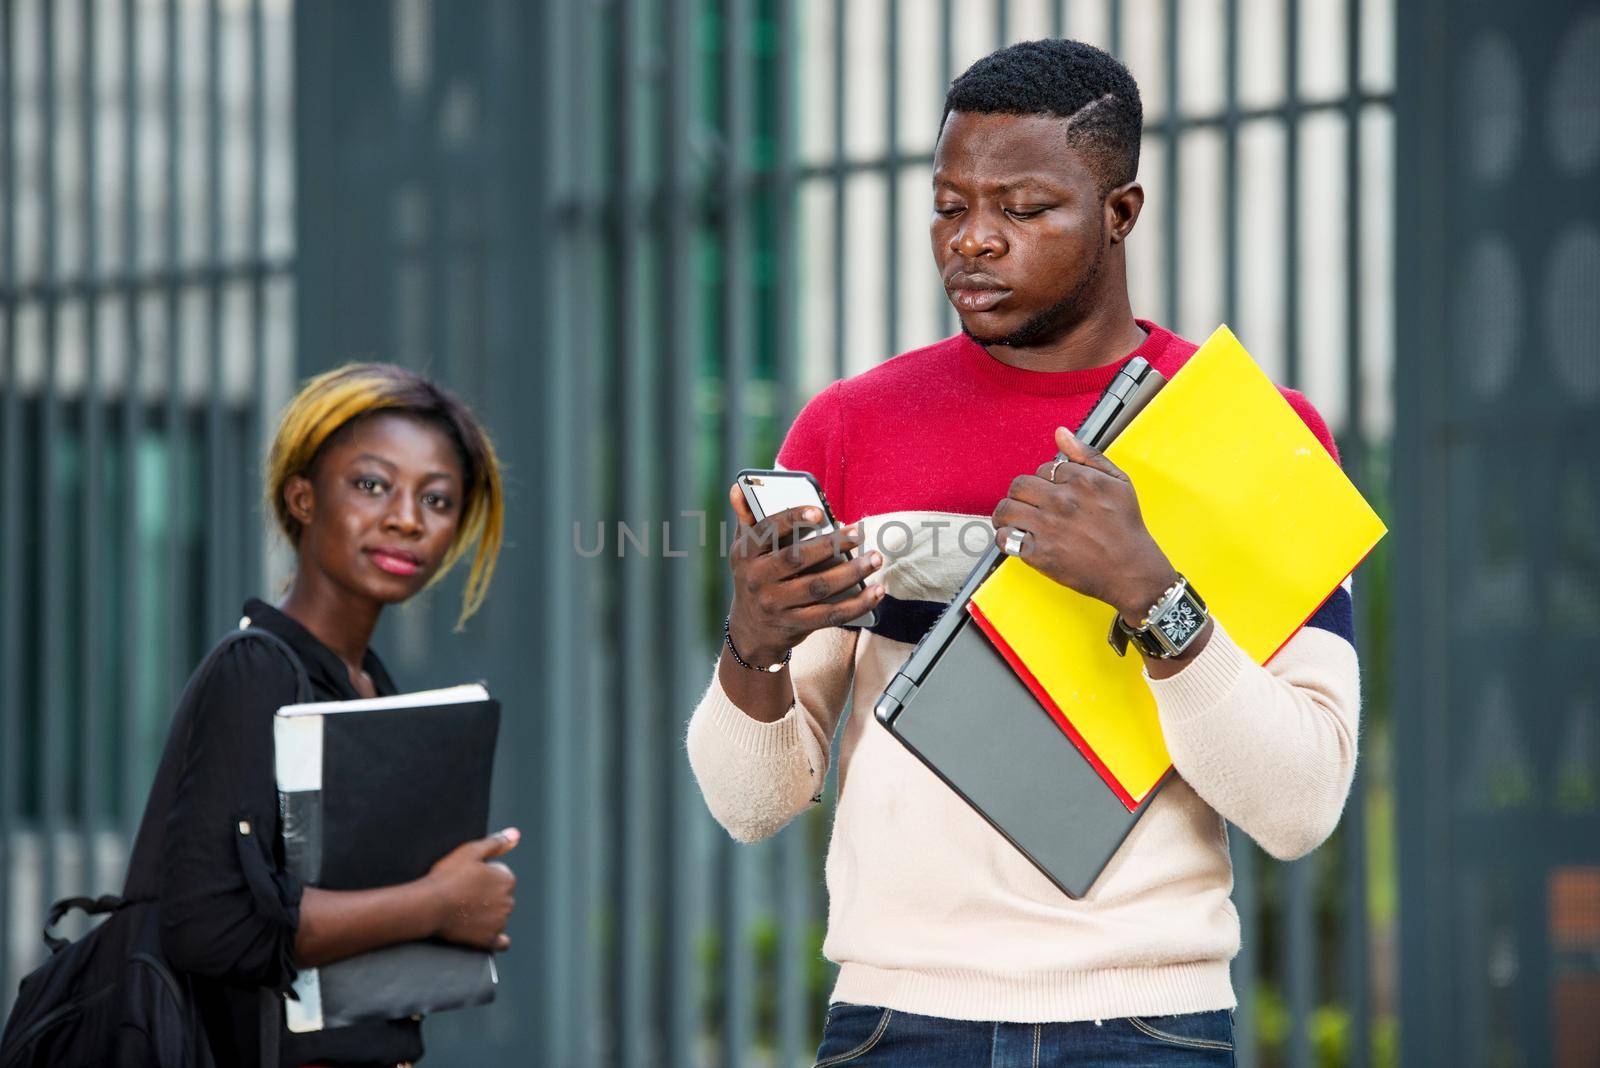 Young student using a smart phone outdoors. A serious guy looks at the phone in front of a modern building after classes.